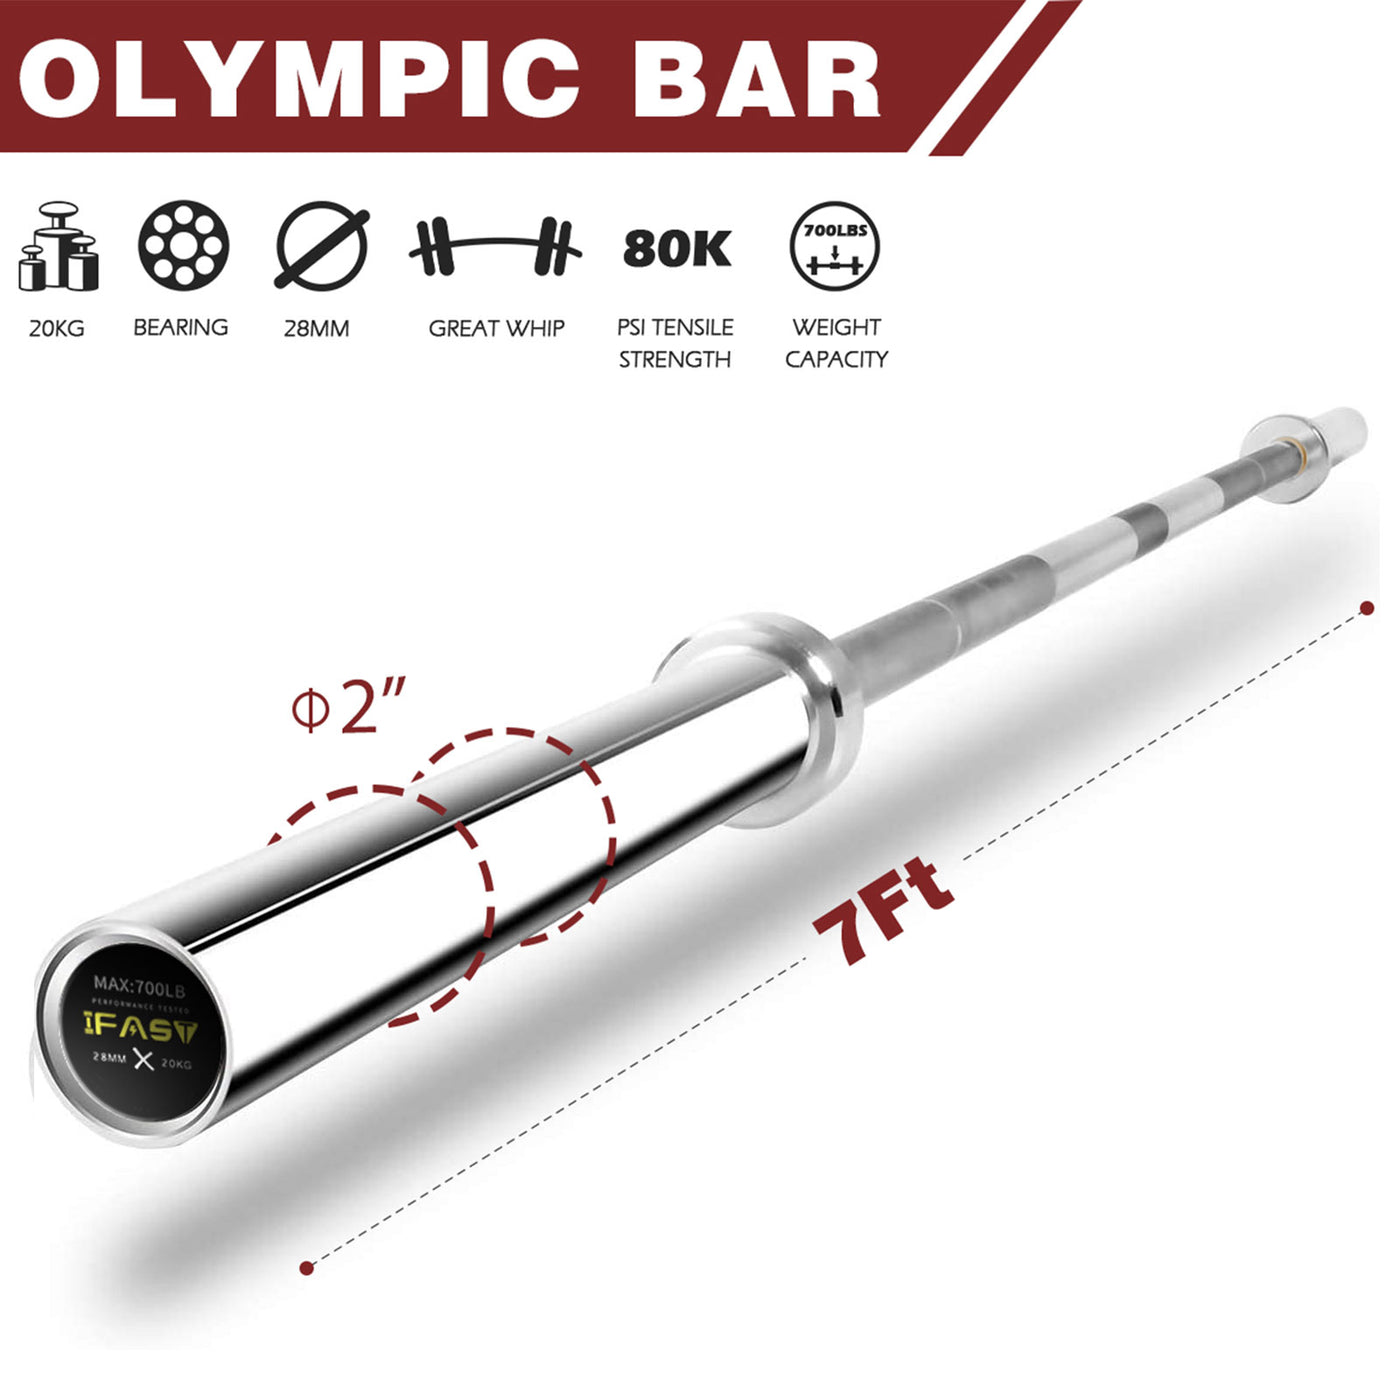 IFAST Olympic bar